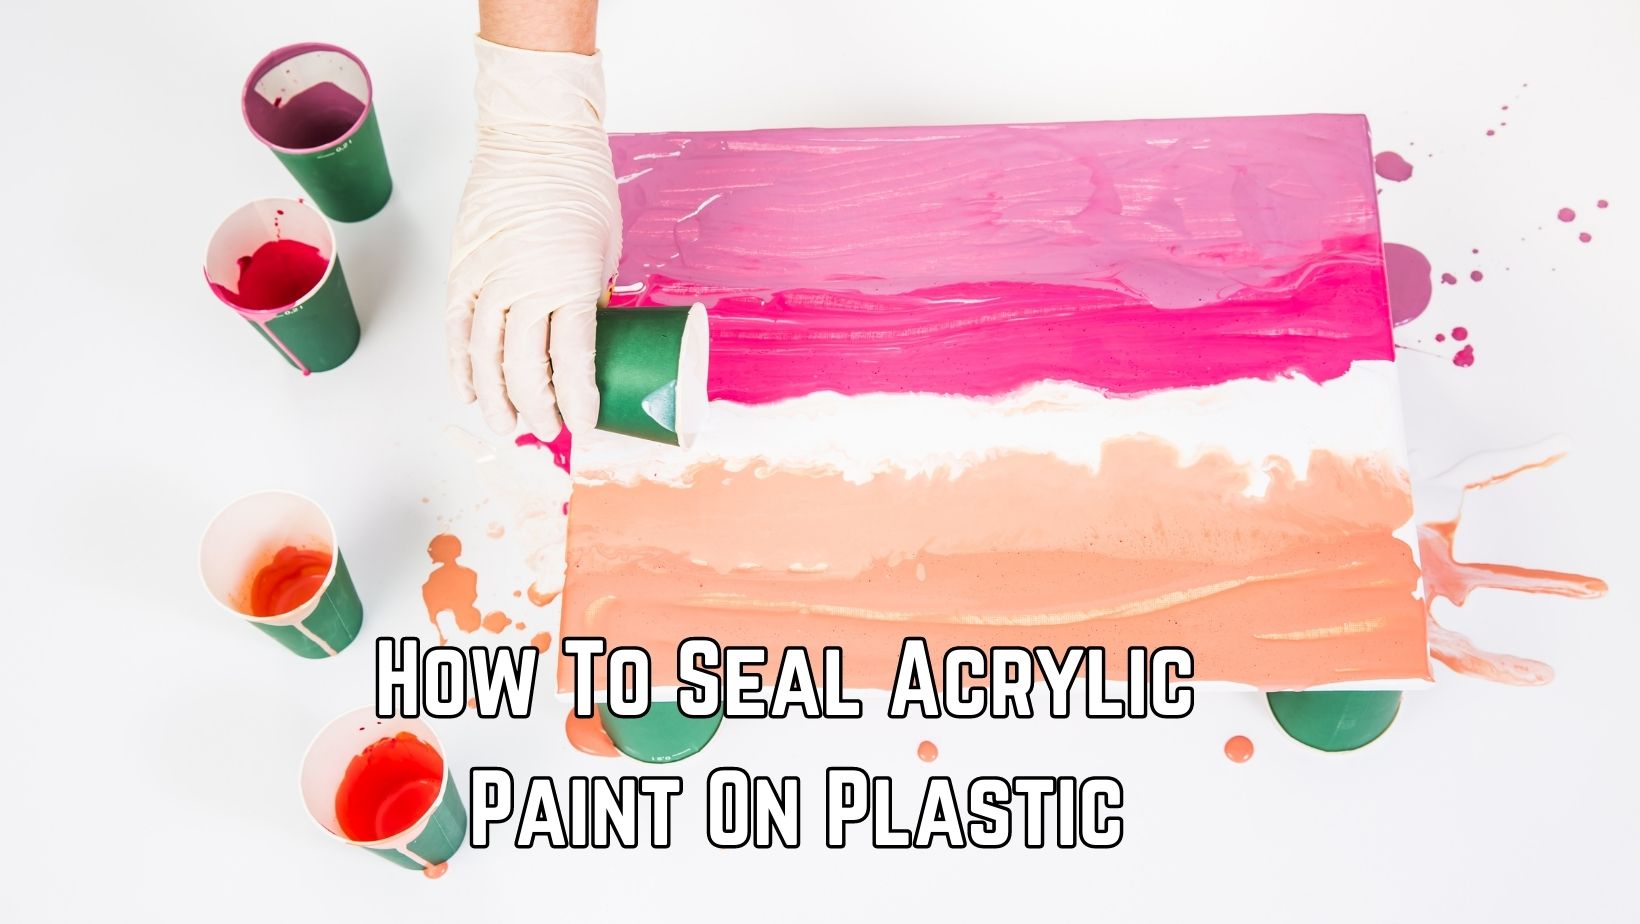 How To Seal Acrylic Paint On Plastic